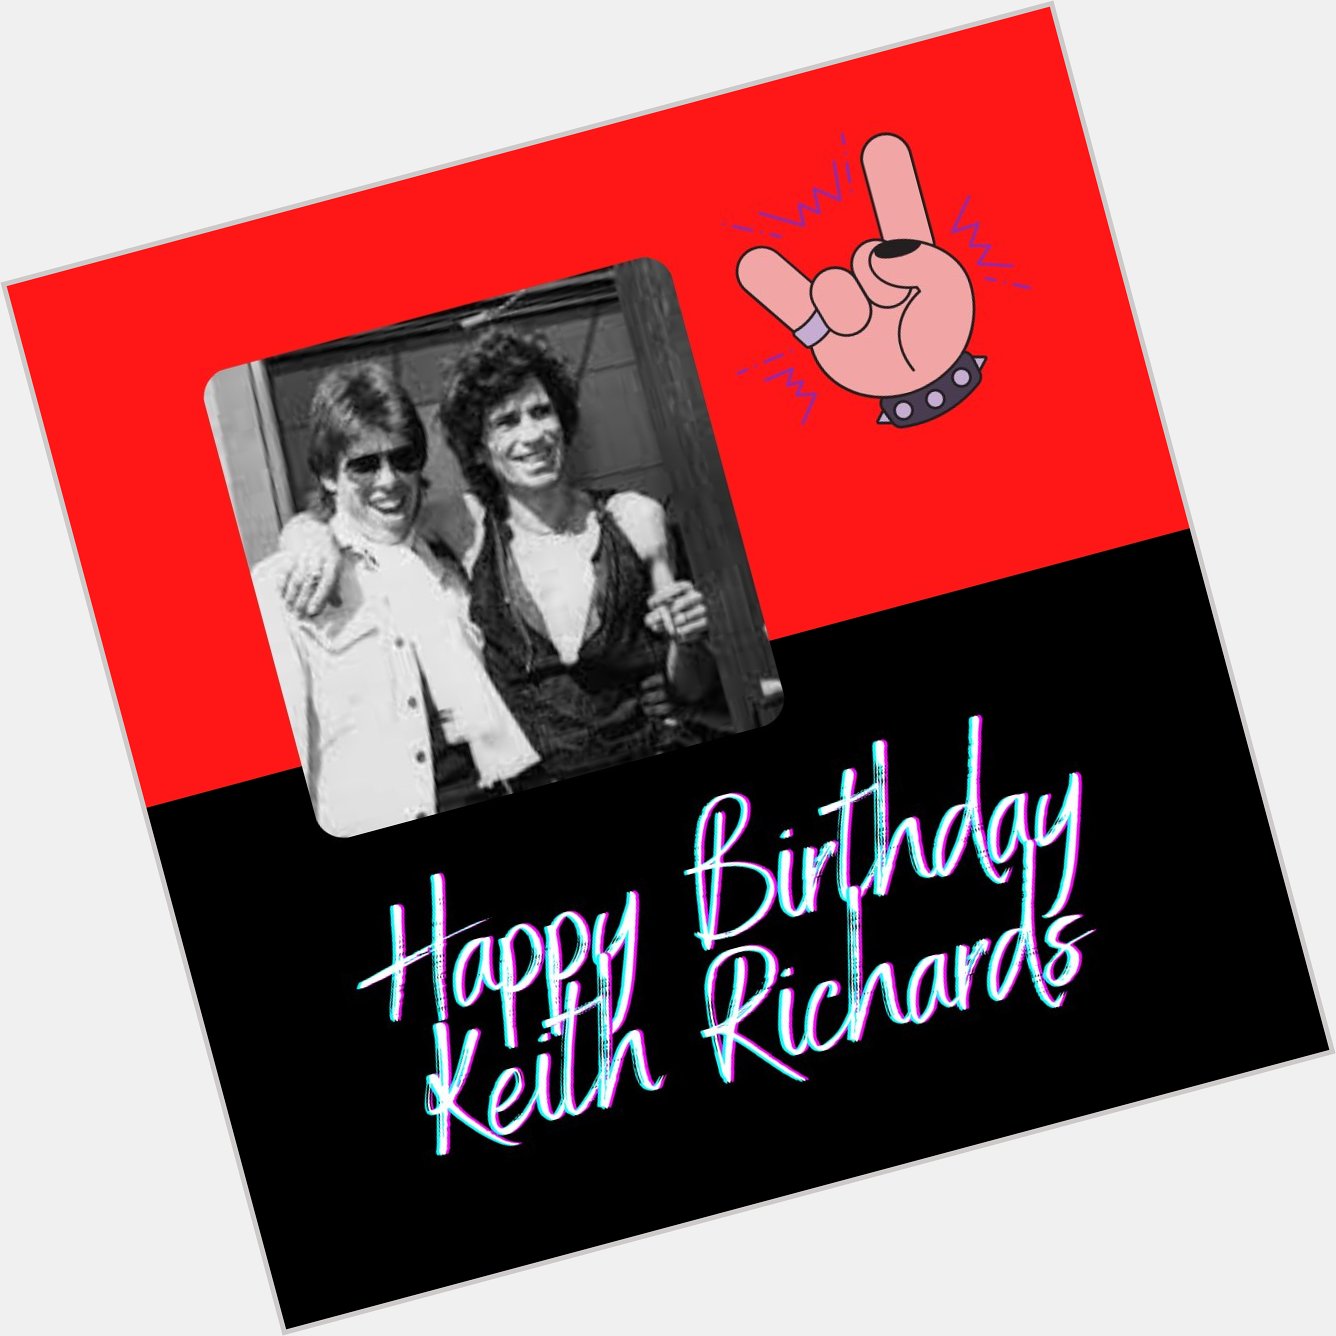 Happy Birthday to our friend Keith Richards, born on December 18th!    